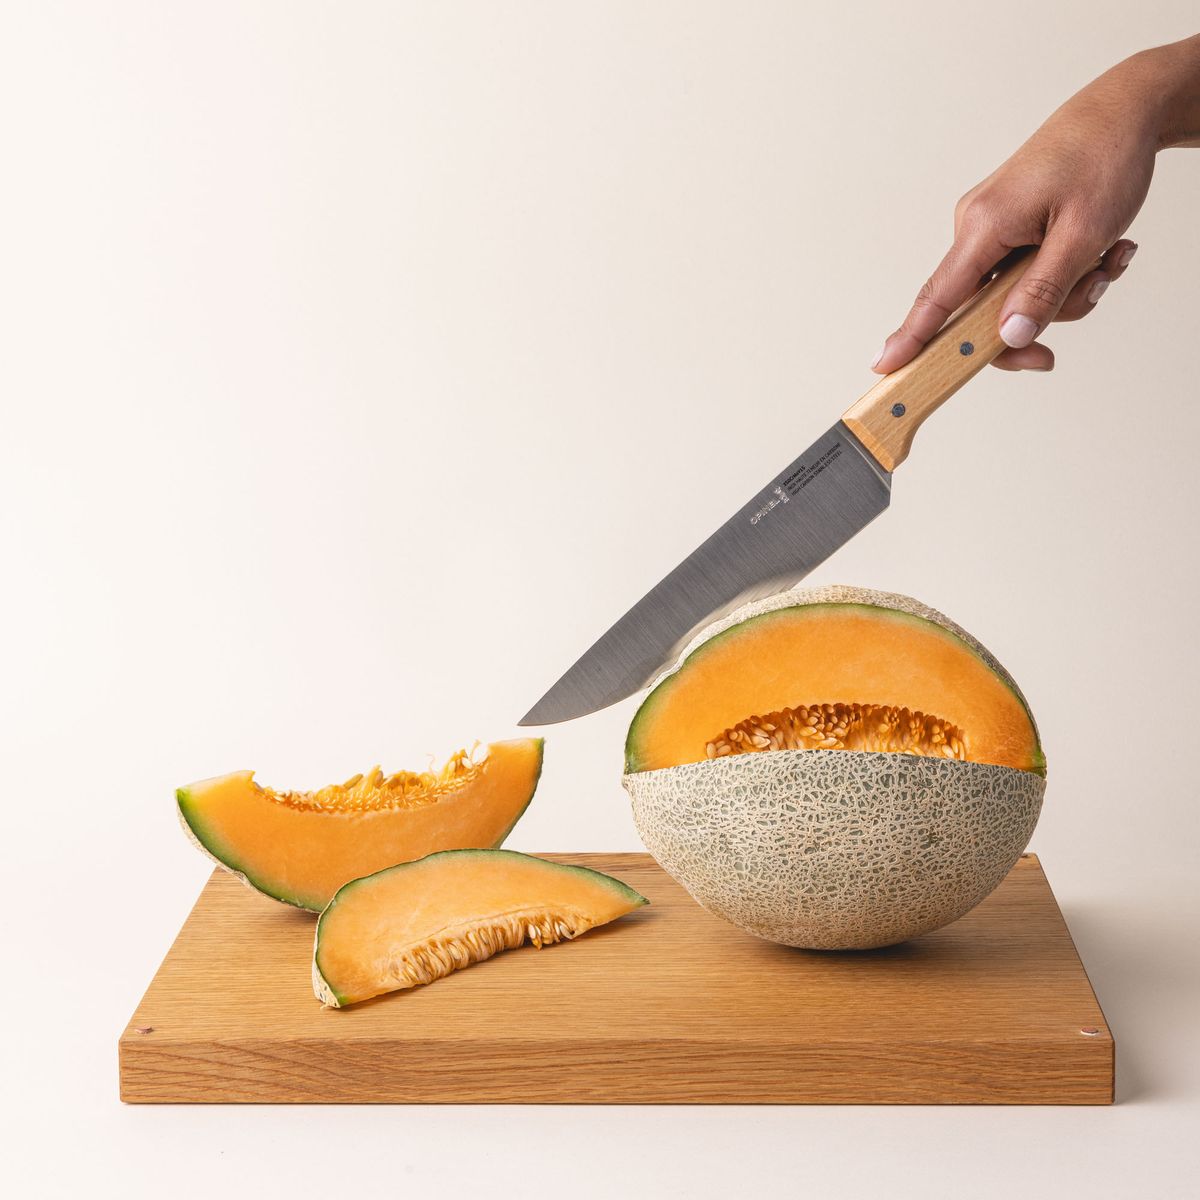 A hand holds a chef's knife with a steel blade and a light wooden handle and is cutting open a cantaloupe on a wooden cutting board.